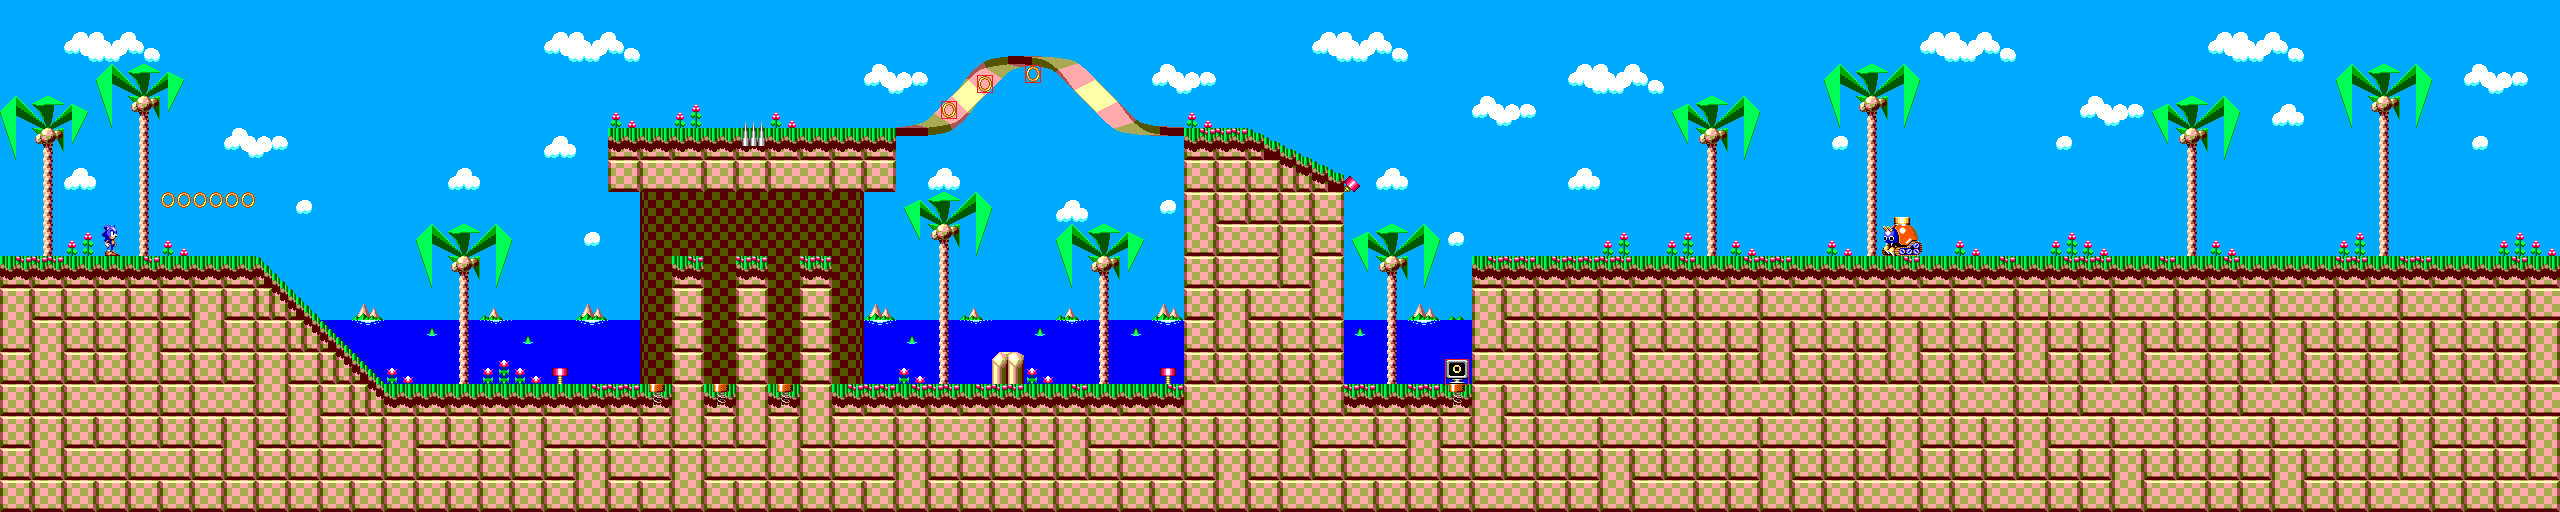 Sonic Chaos - Master System (Stage 03-Sleeping Egg Zone)